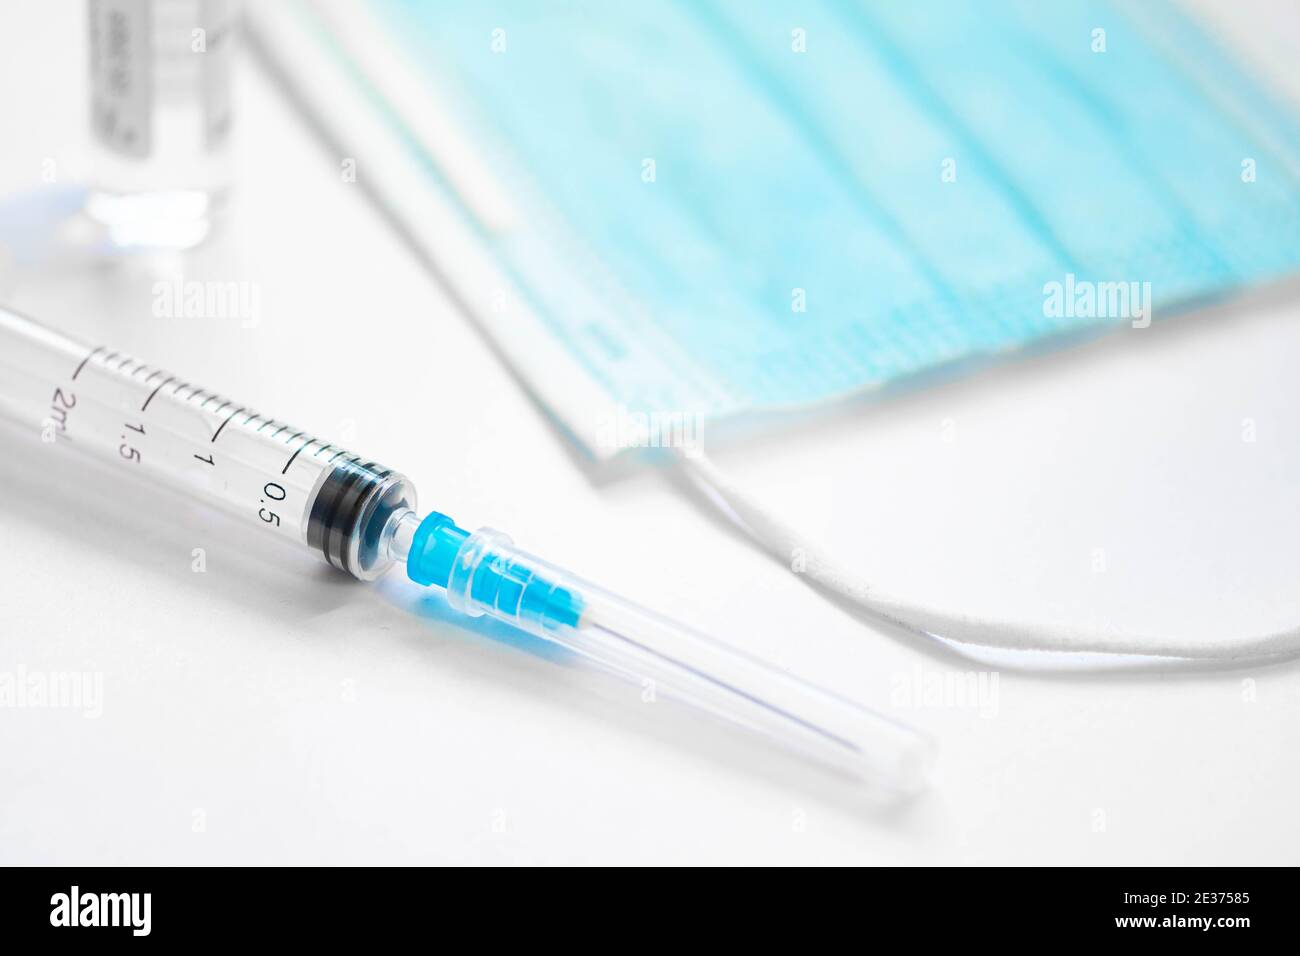 Syringe with needle, vial and surgical face mask on a white table ready to be used. Covid or Coronavirus vaccine background Stock Photo